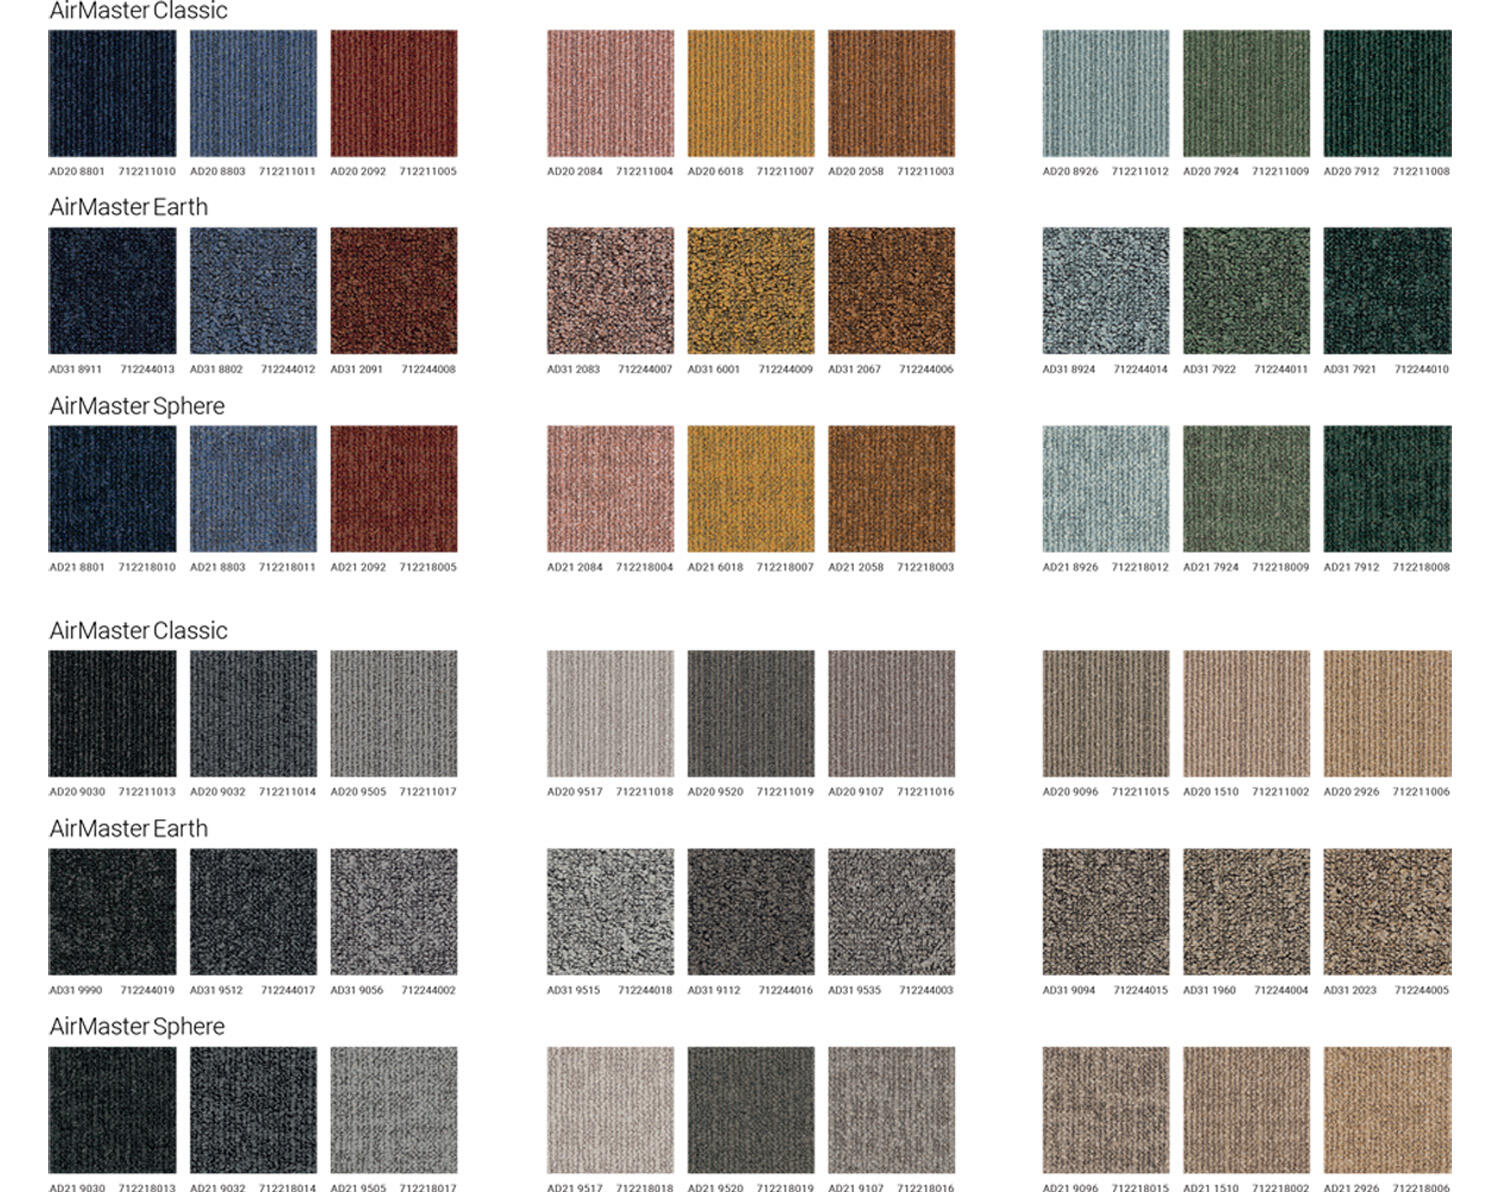 Matching colour palette of DESSO AirMaster Classic, Earth, and Sphere carpet tile collections